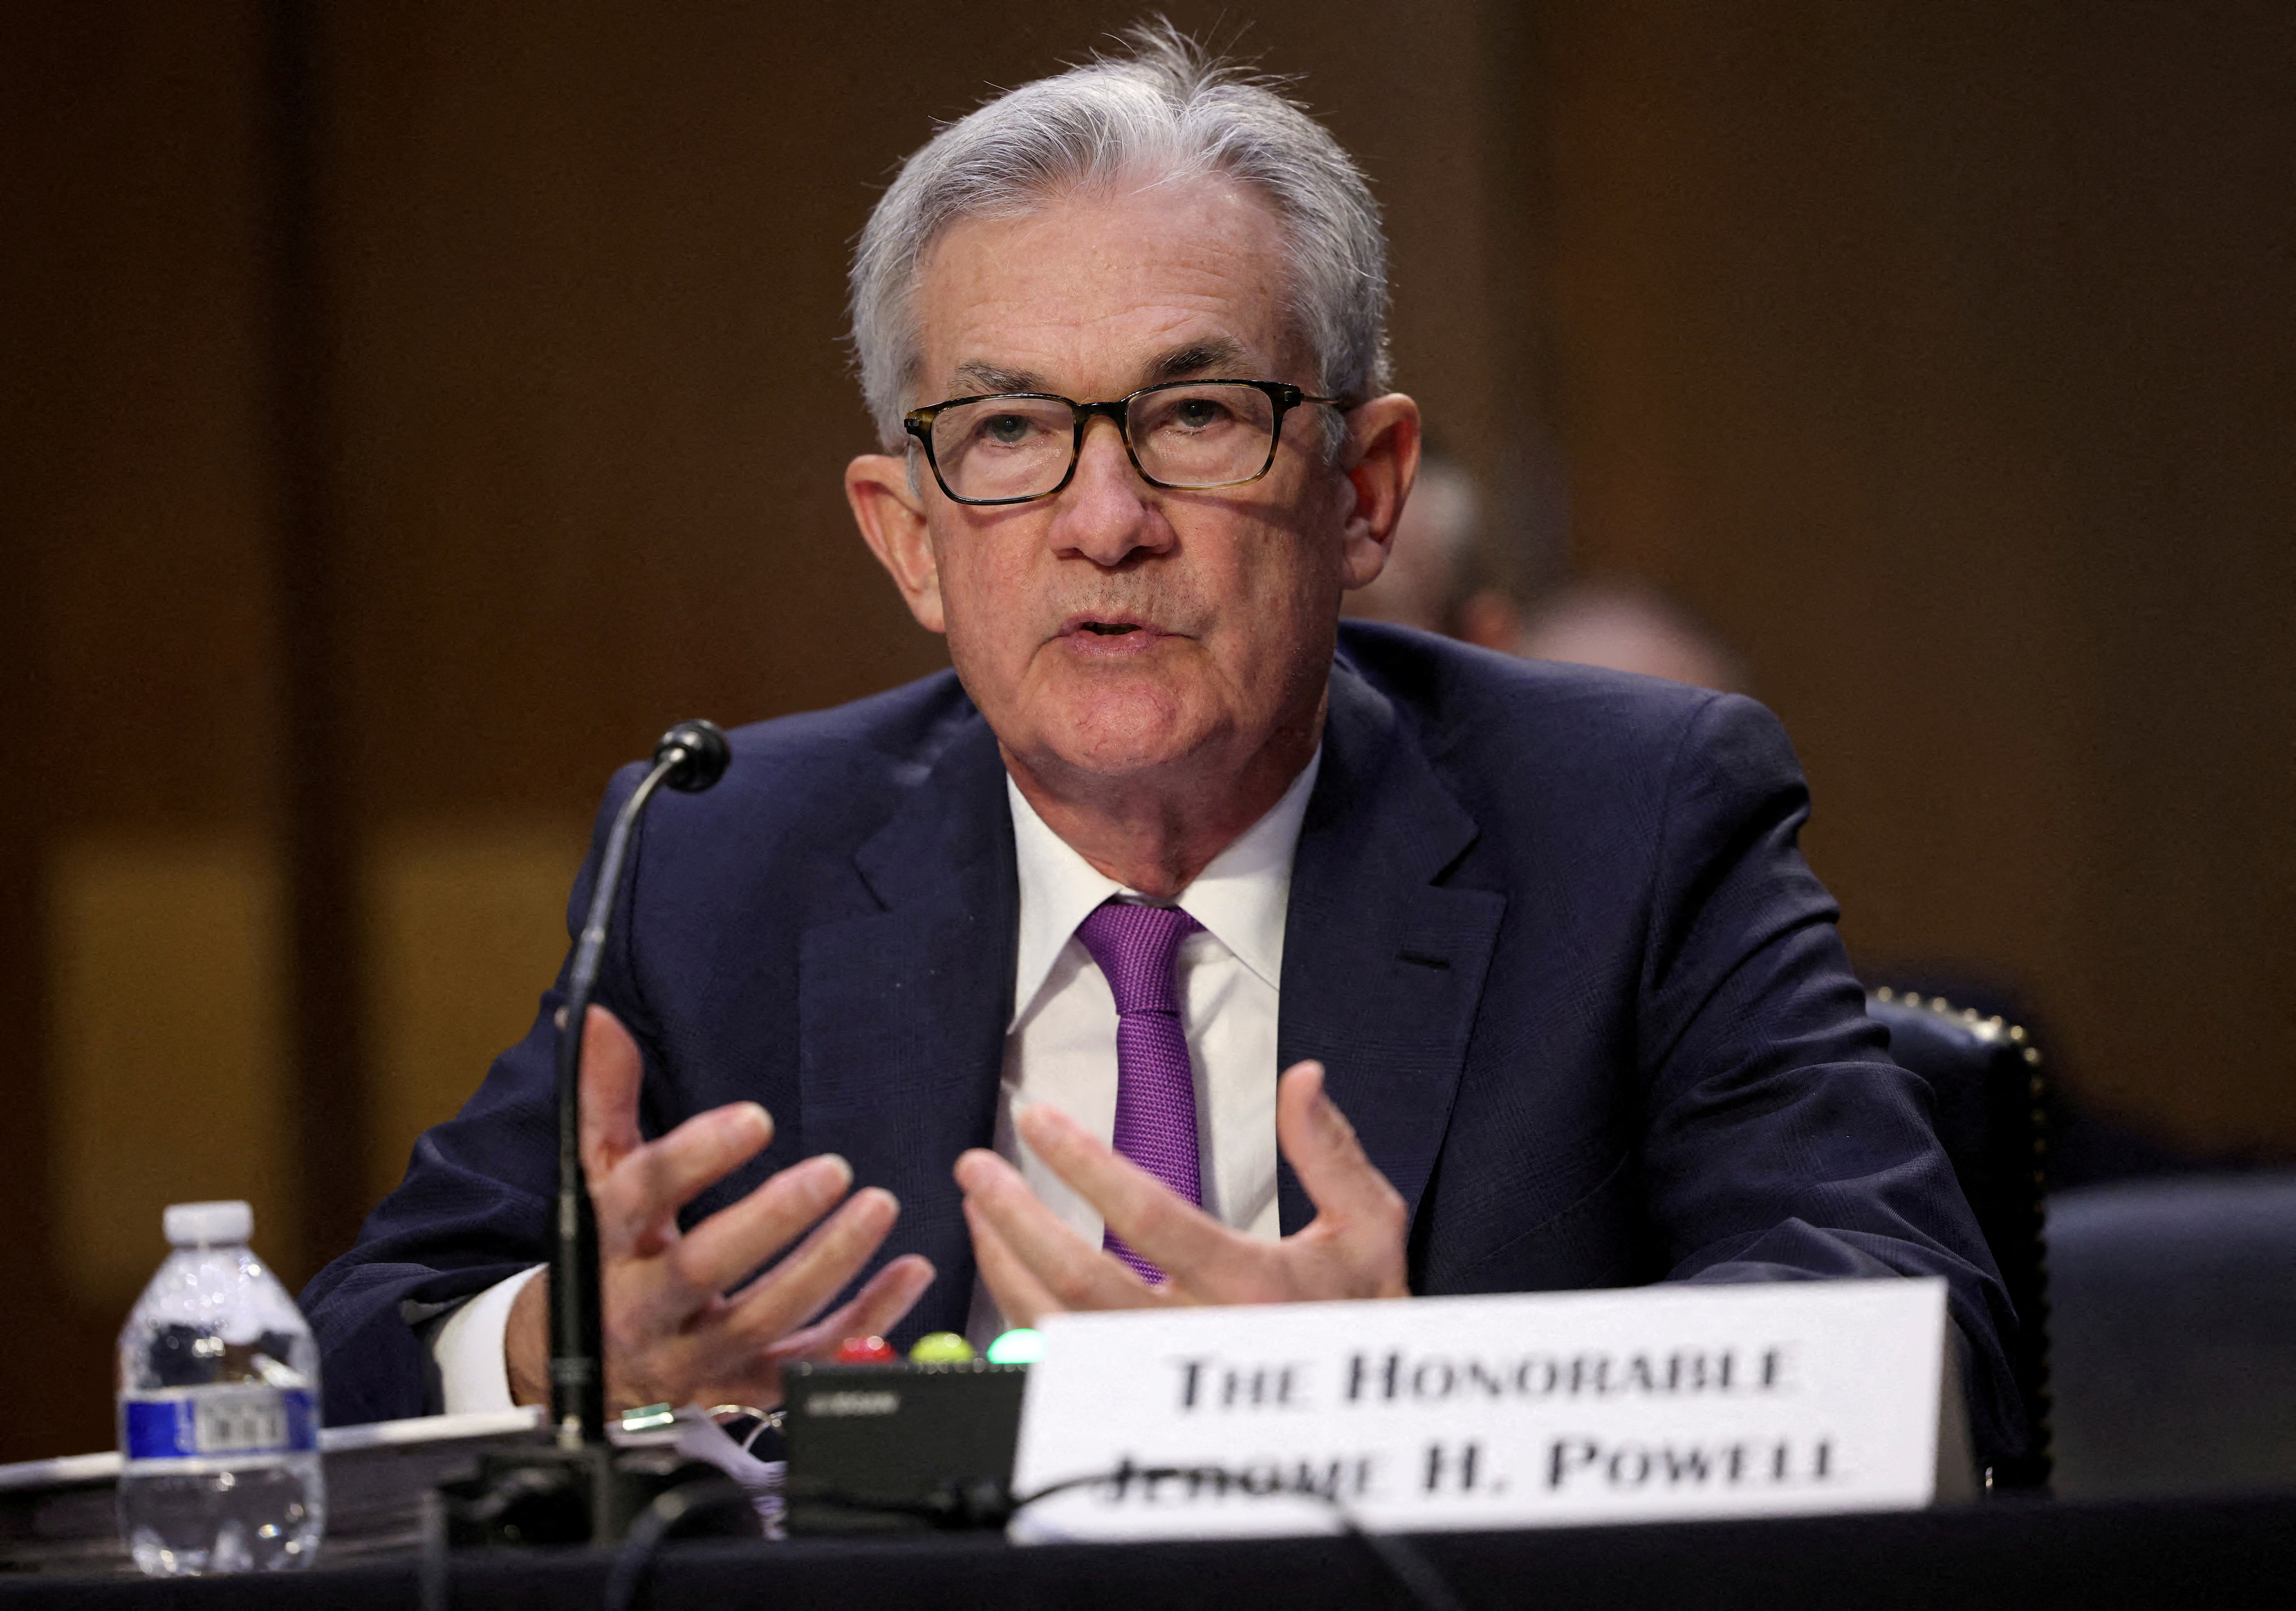 Fed Chair Powell testifies at the Hart Senate Office Building in Washington